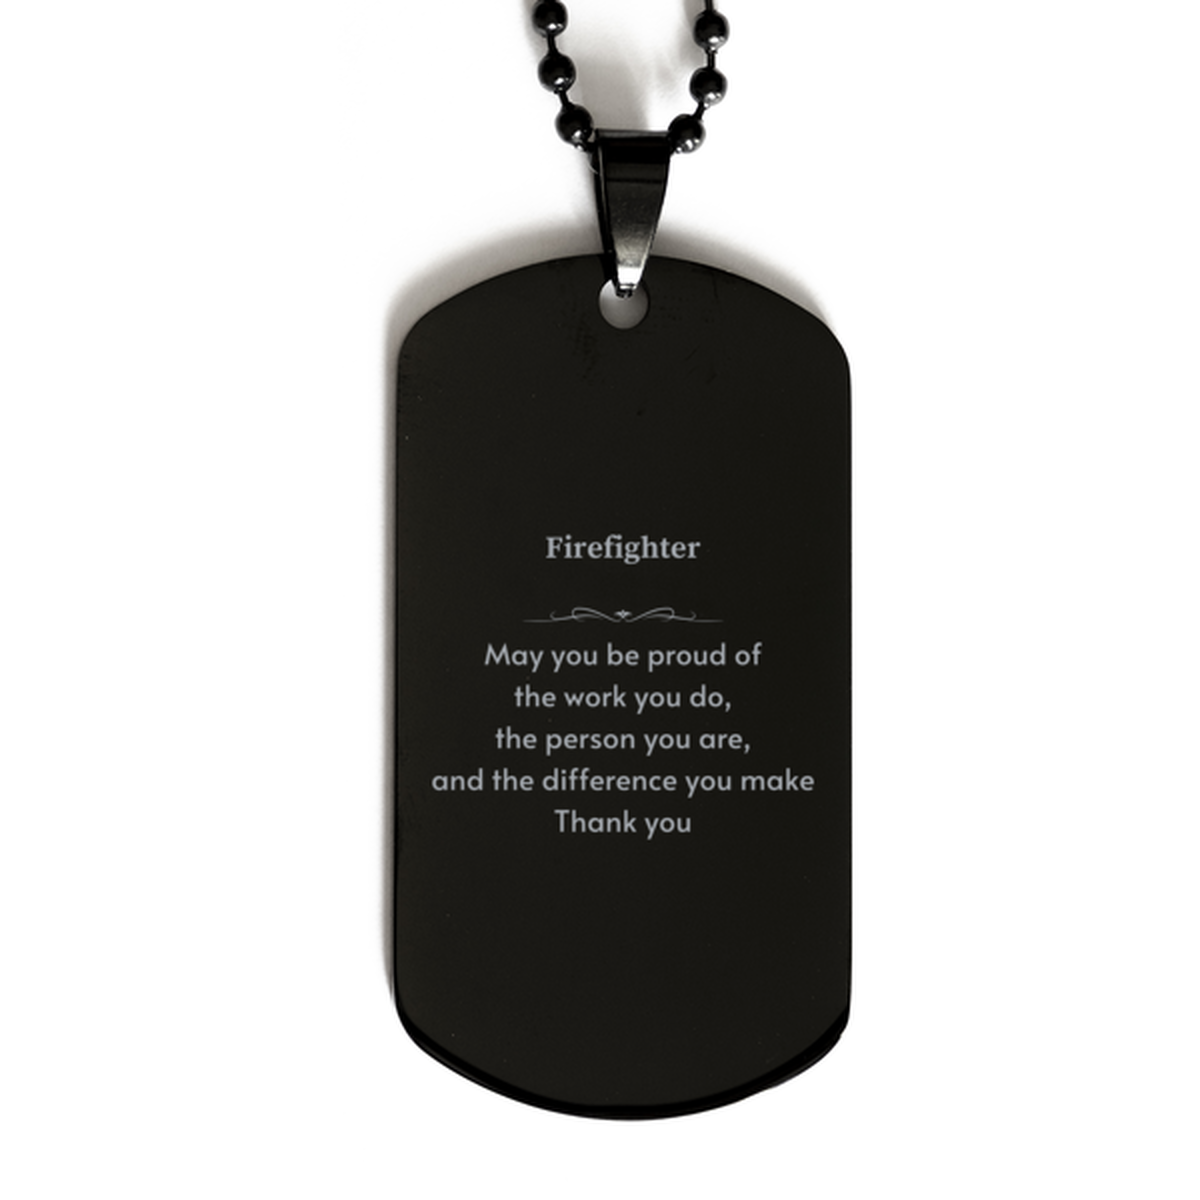 Heartwarming Black Dog Tag Retirement Coworkers Gifts for Firefighter, Firefighter May You be proud of the work you do, the person you are Gifts for Boss Men Women Friends